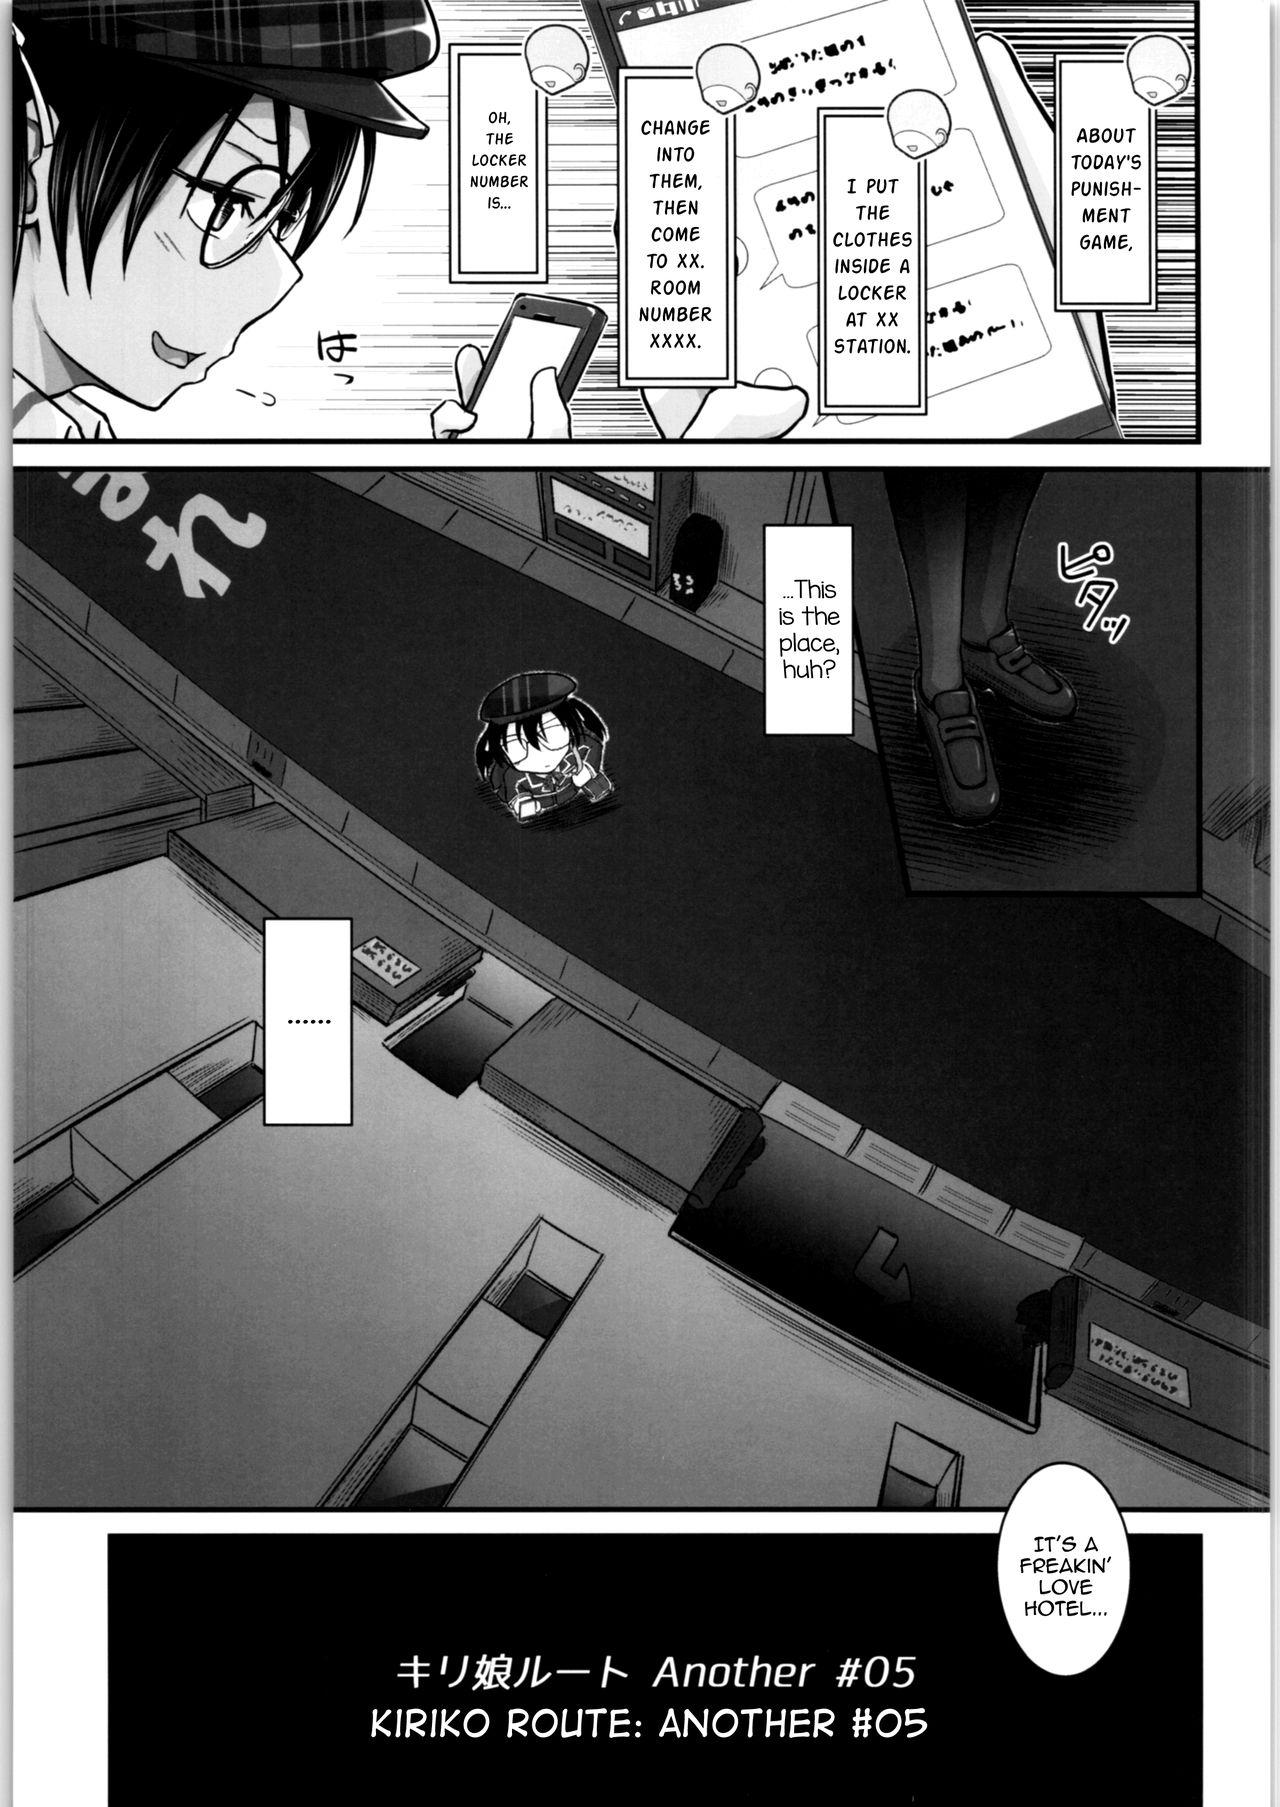 Cams Kiriko Route Another #05 - Sword art online Fudendo - Page 4